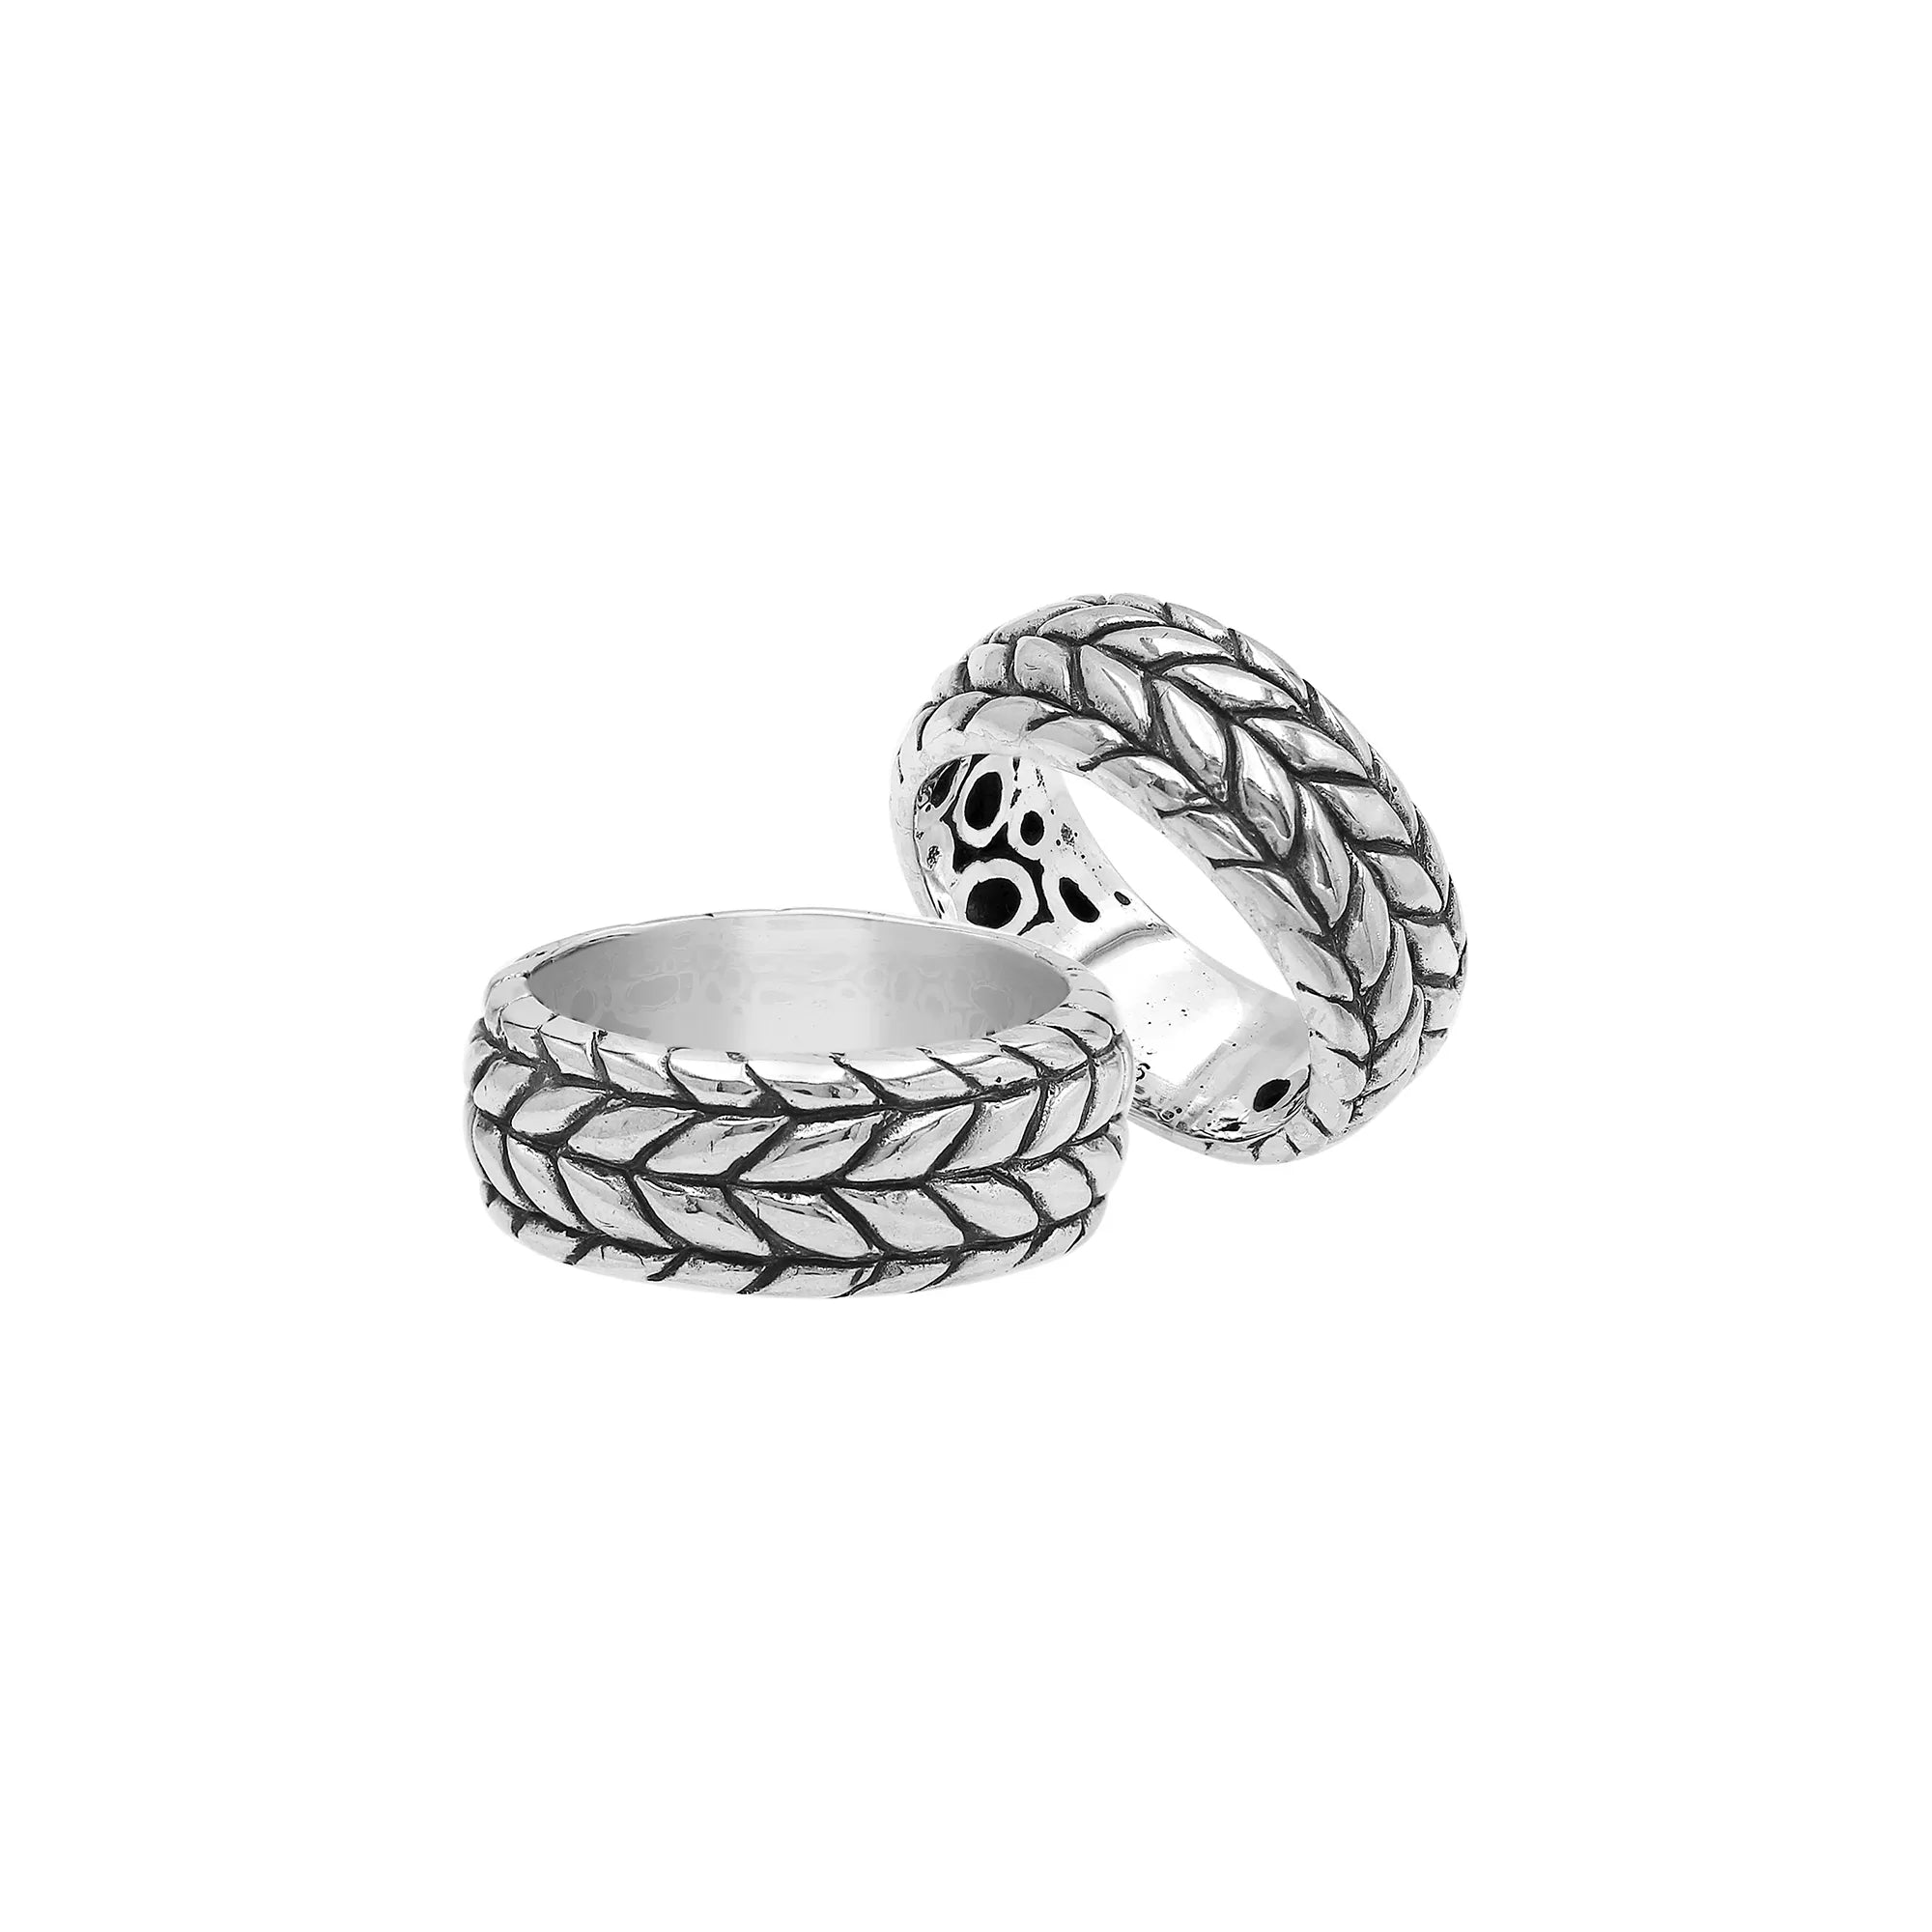 Buy Gemtastic Sterling Silver High Polish Plain Band RIng at Amazon.in